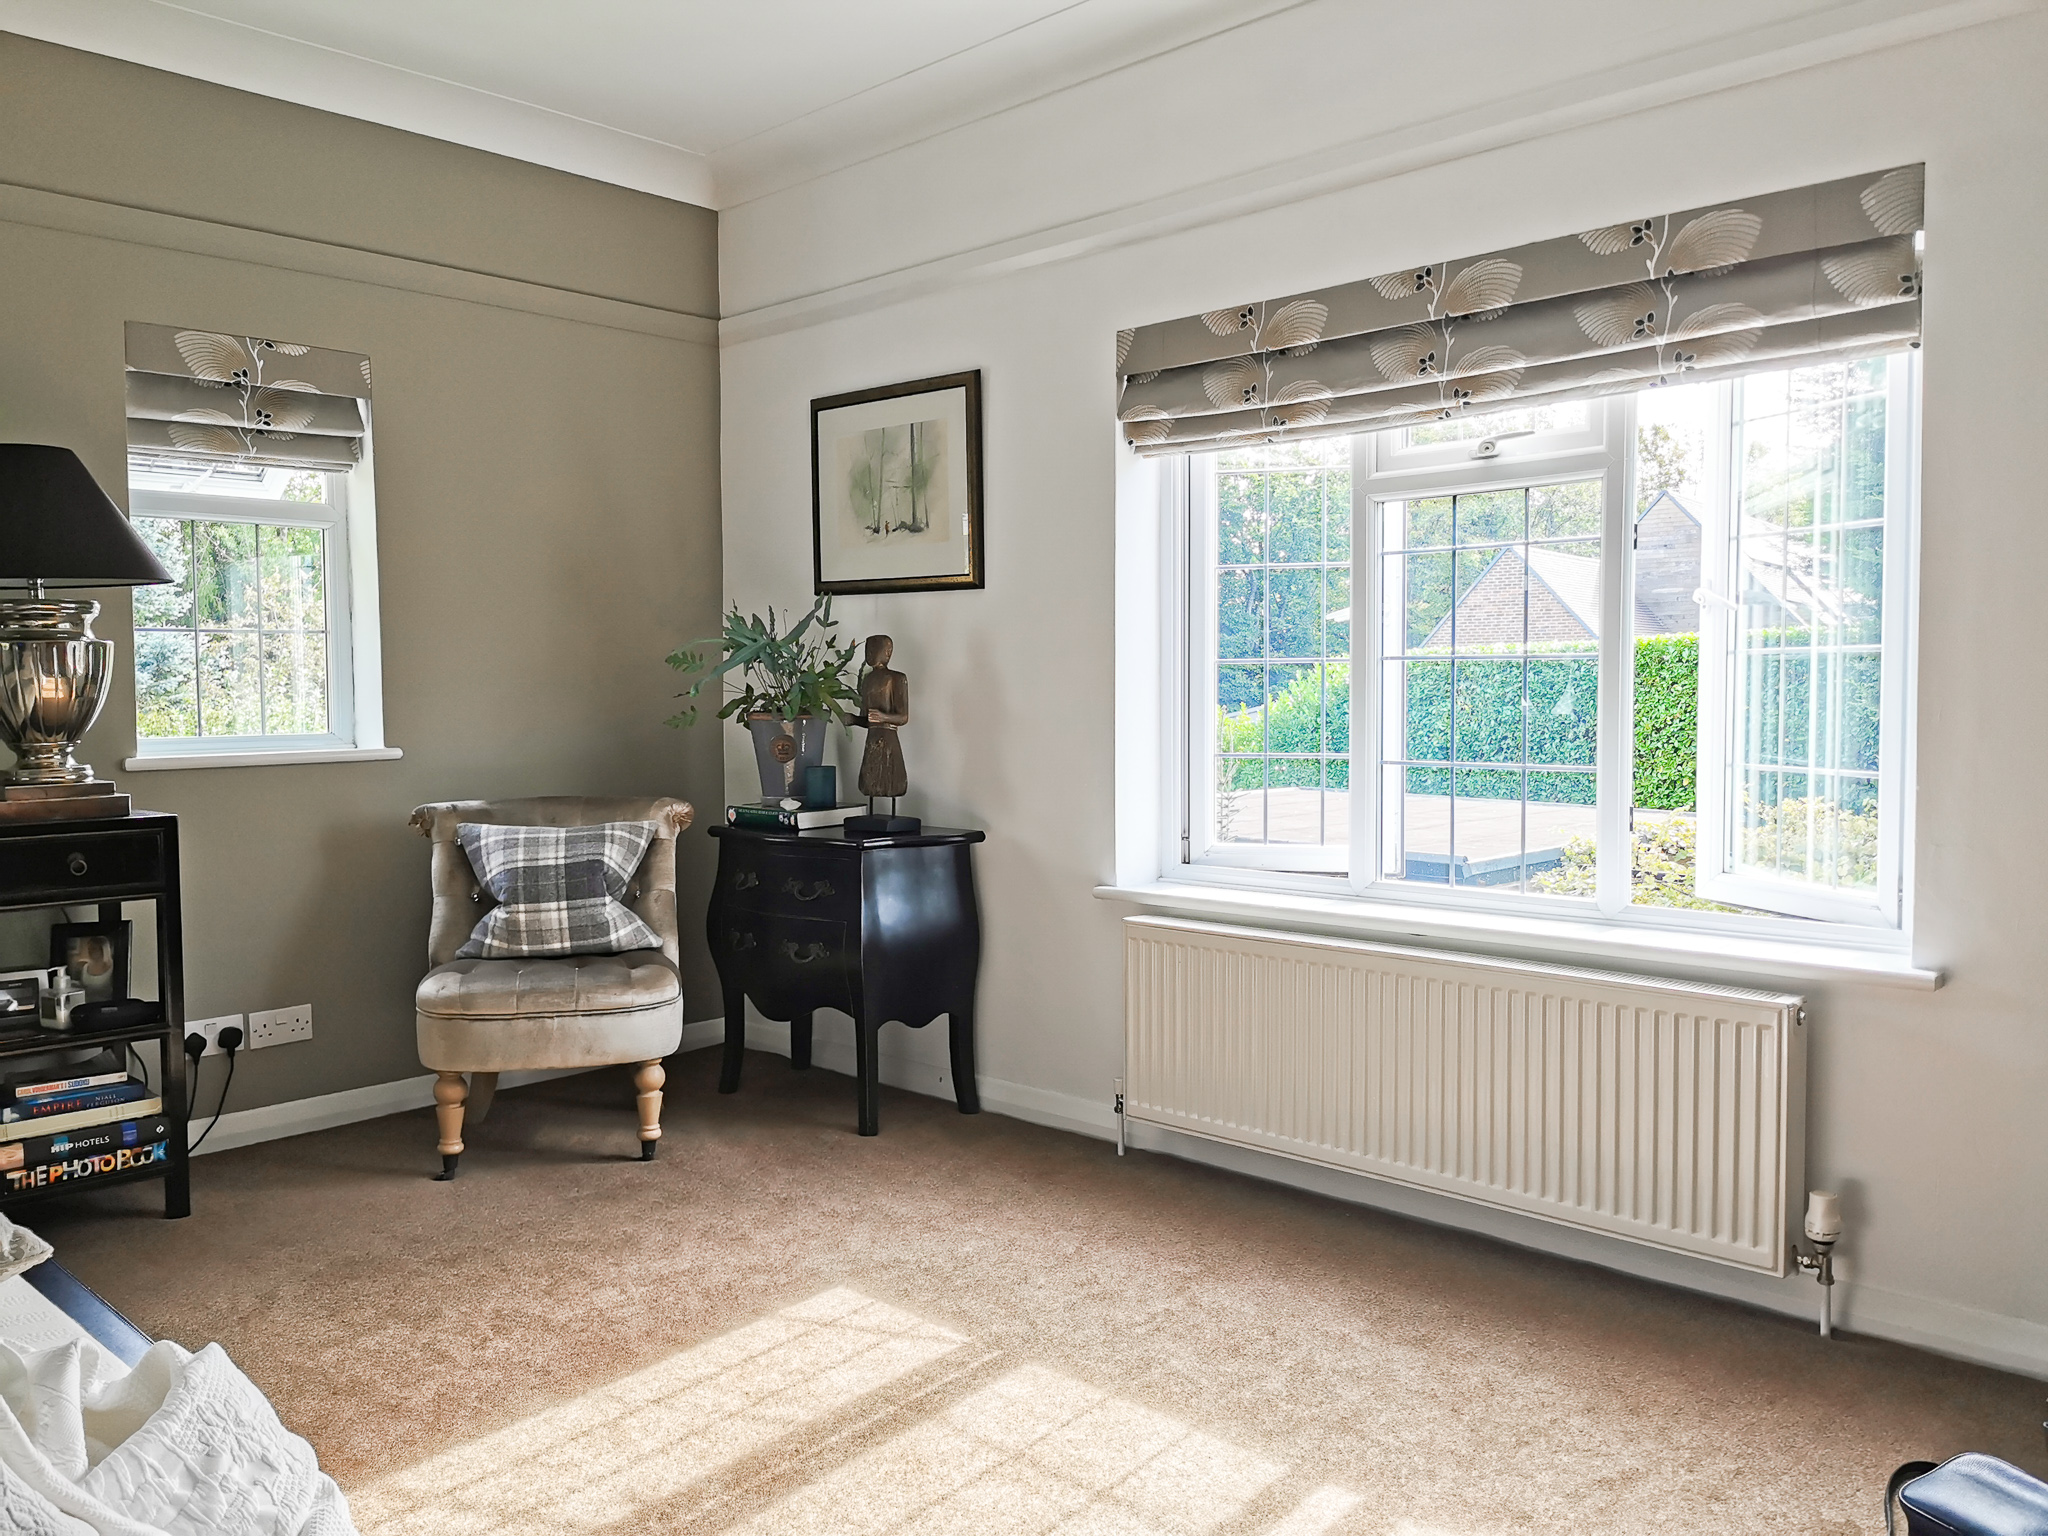 Matching roman blinds with fascia